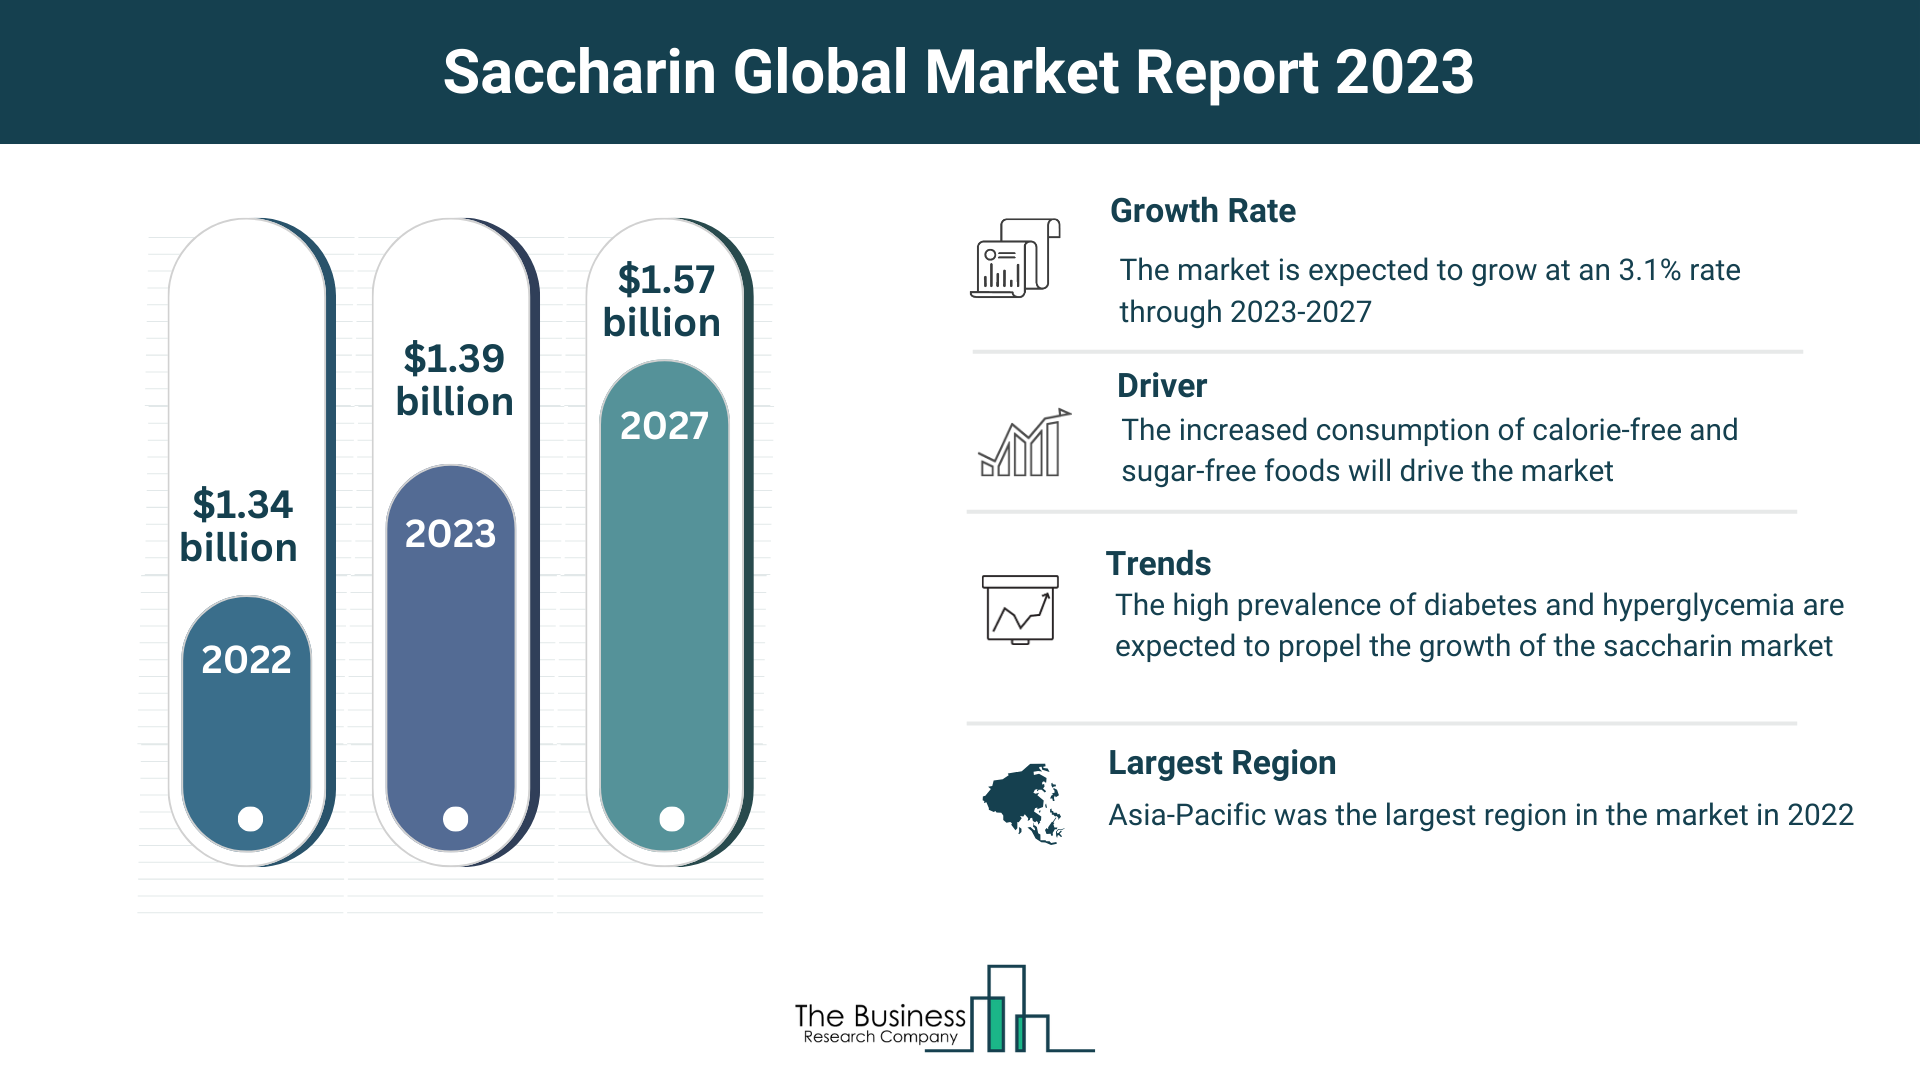 5 Key Takeaways From The Saccharin Market Report 2023